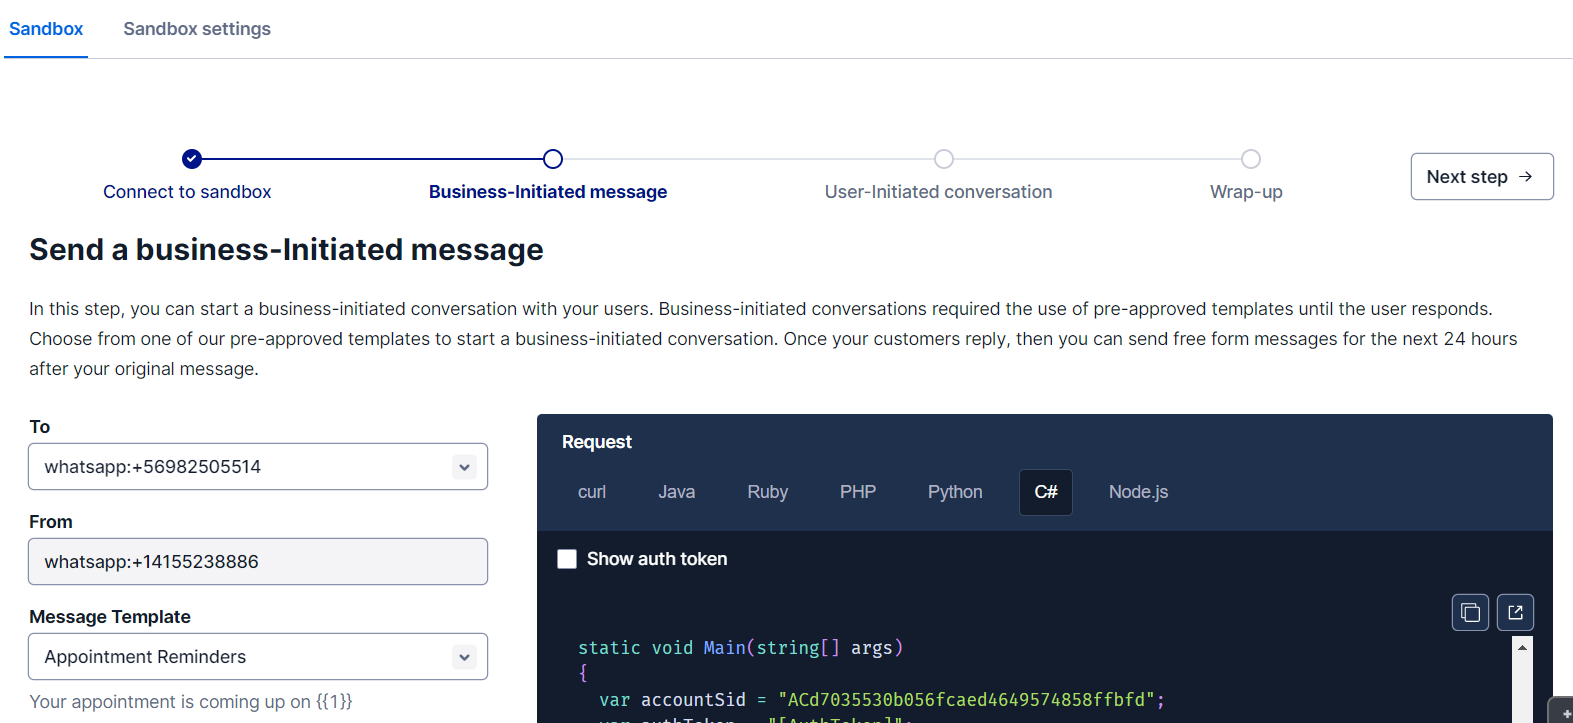 Twilio Sandbox for WhatsApp console for sending test messages, initializing the process with a test message